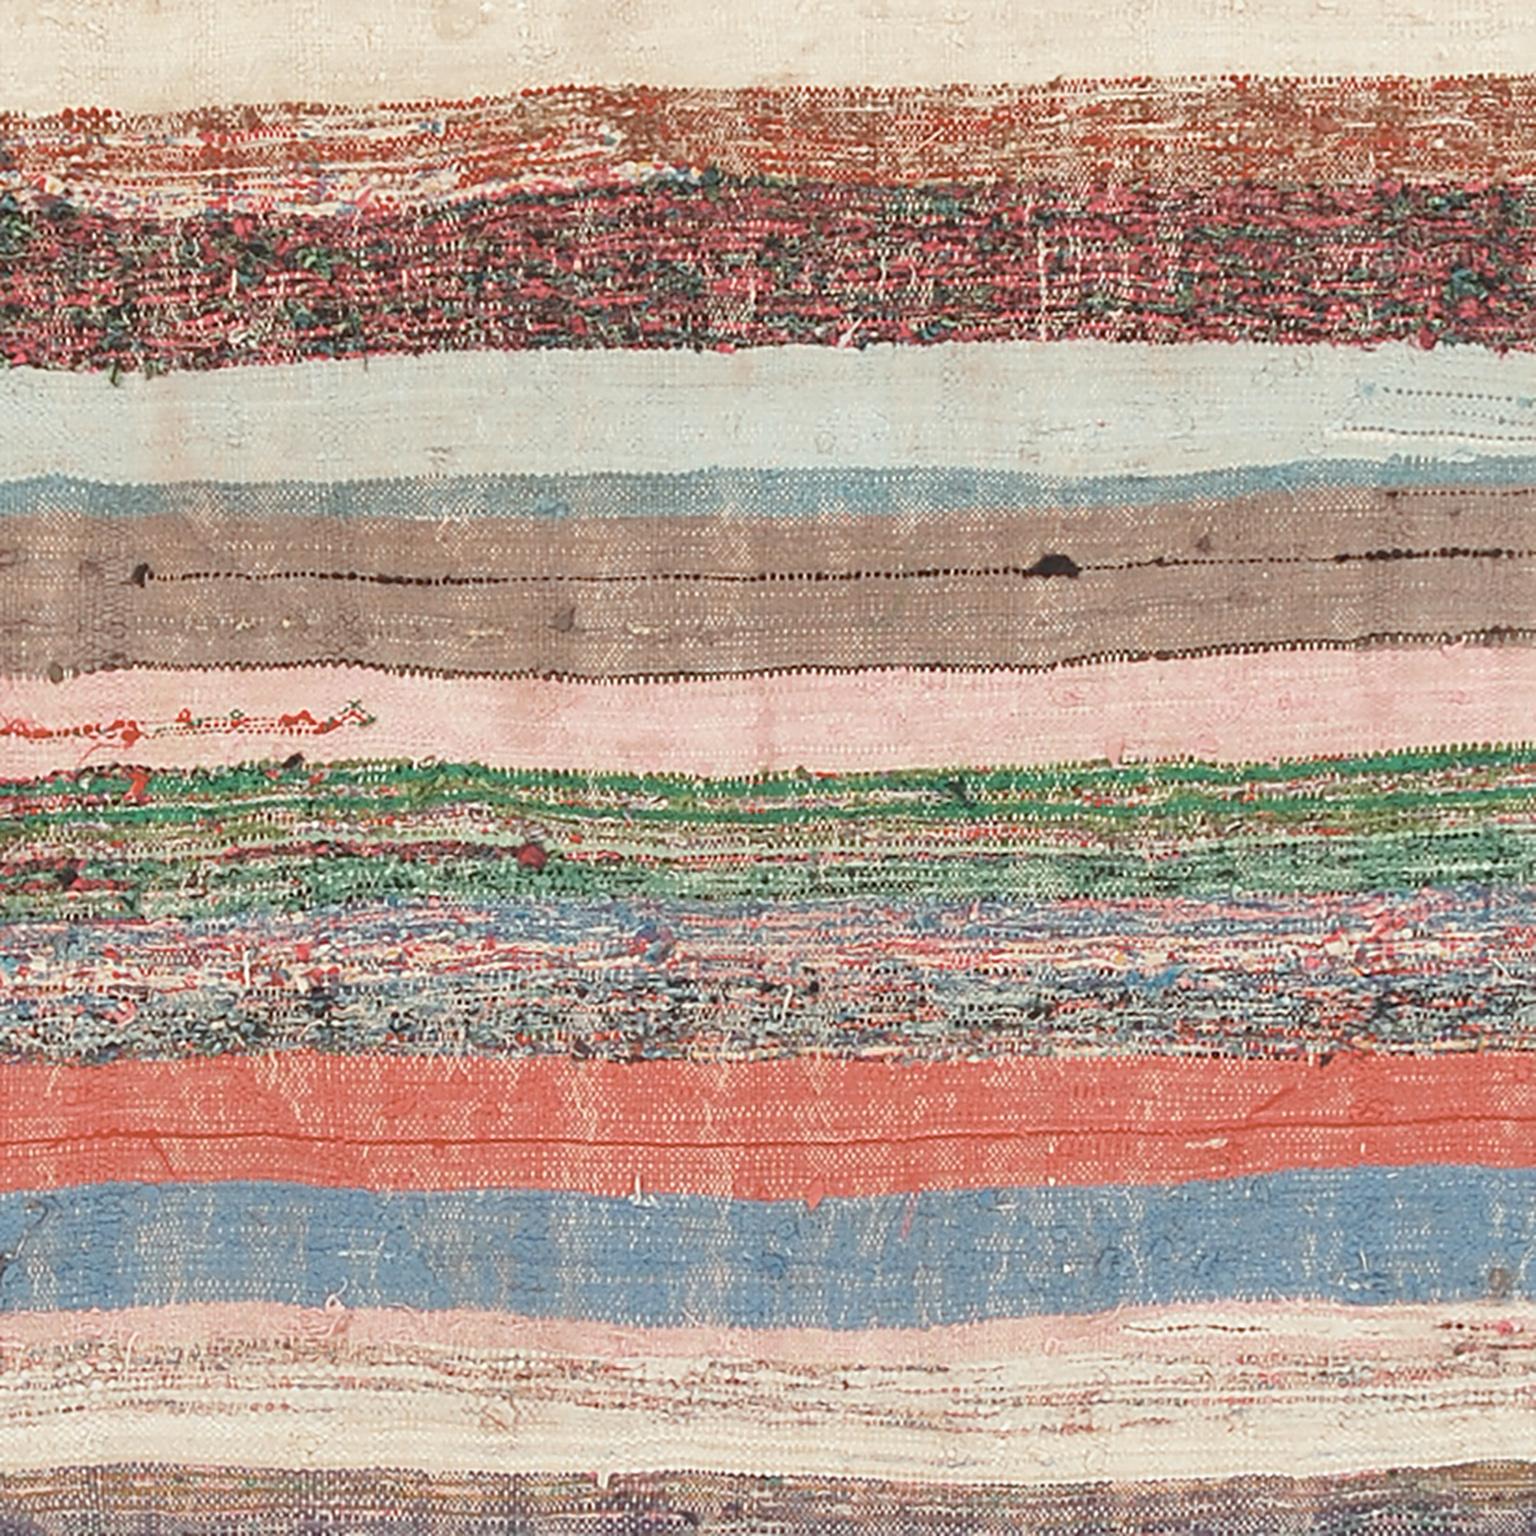 Hand-Woven Mid-20th Century Moroccan Rag Rug For Sale